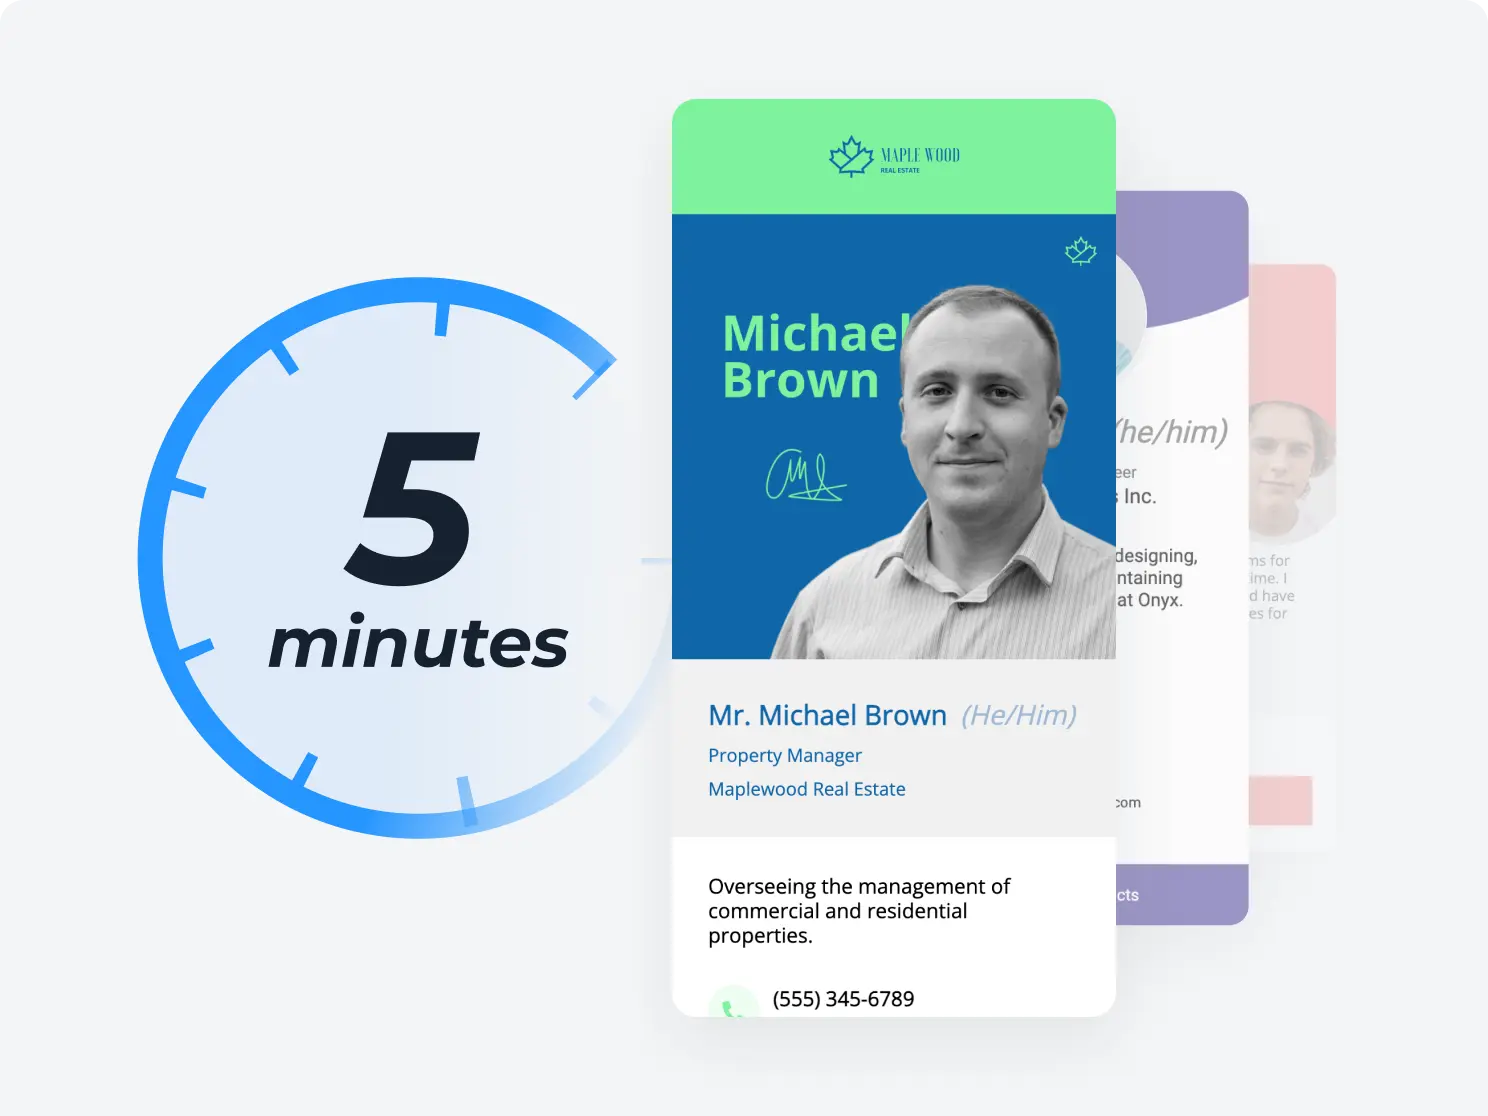 Instantly create and share digital business cards